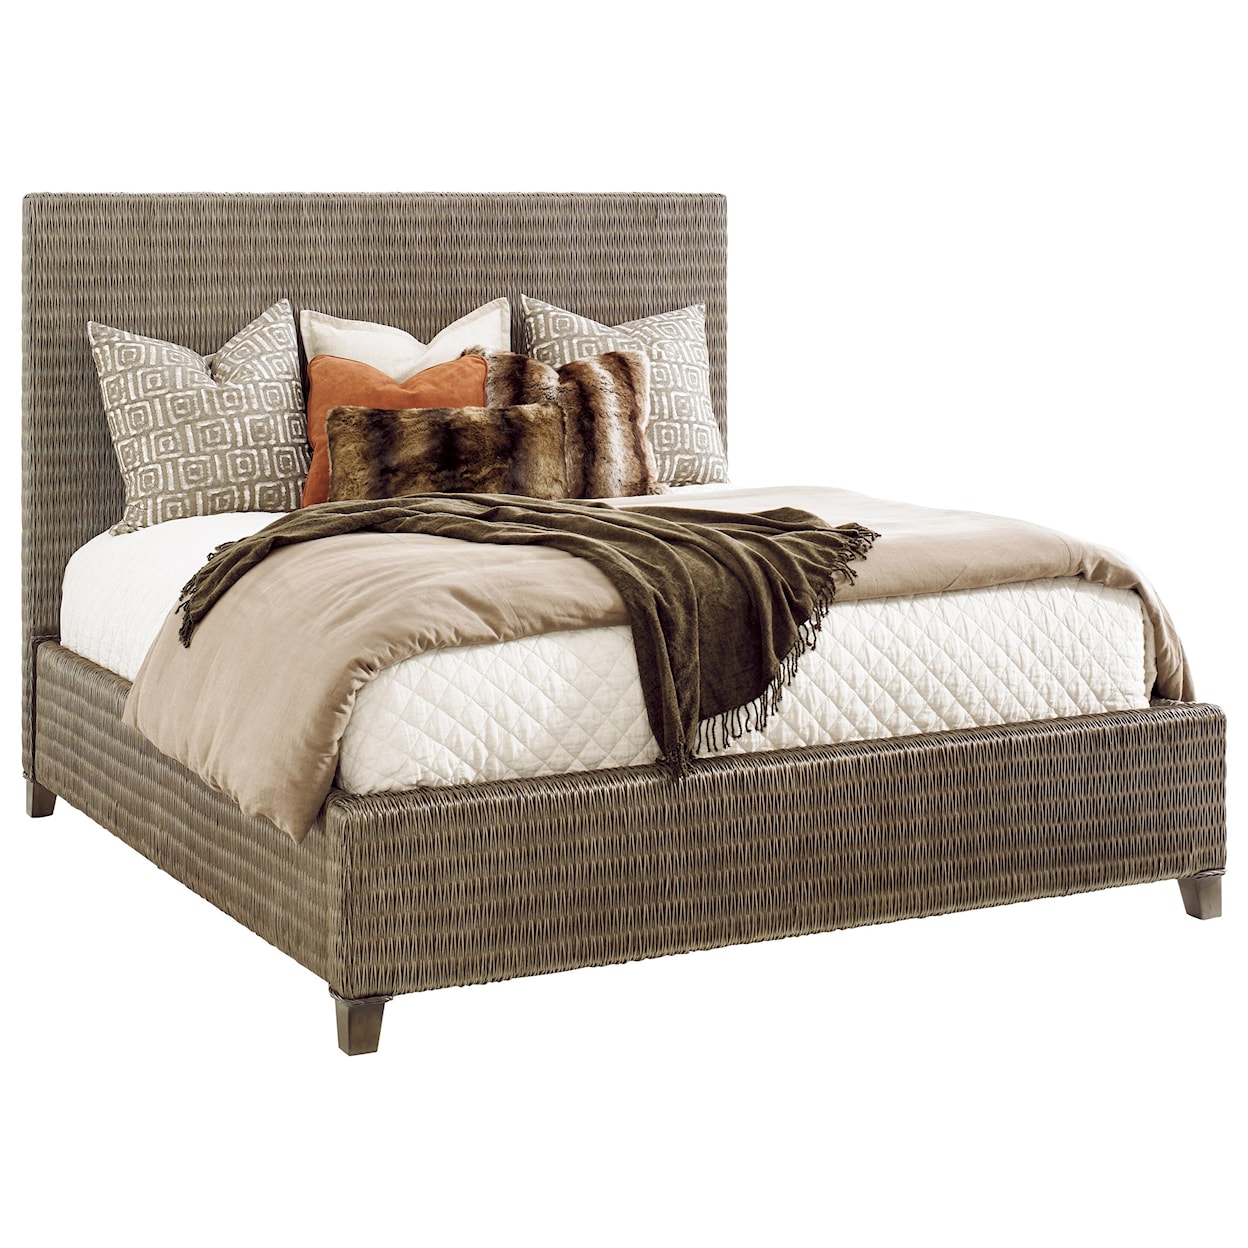 Tommy Bahama Home Cypress Point Driftwood Isle Woven Bed 5/0 Queen